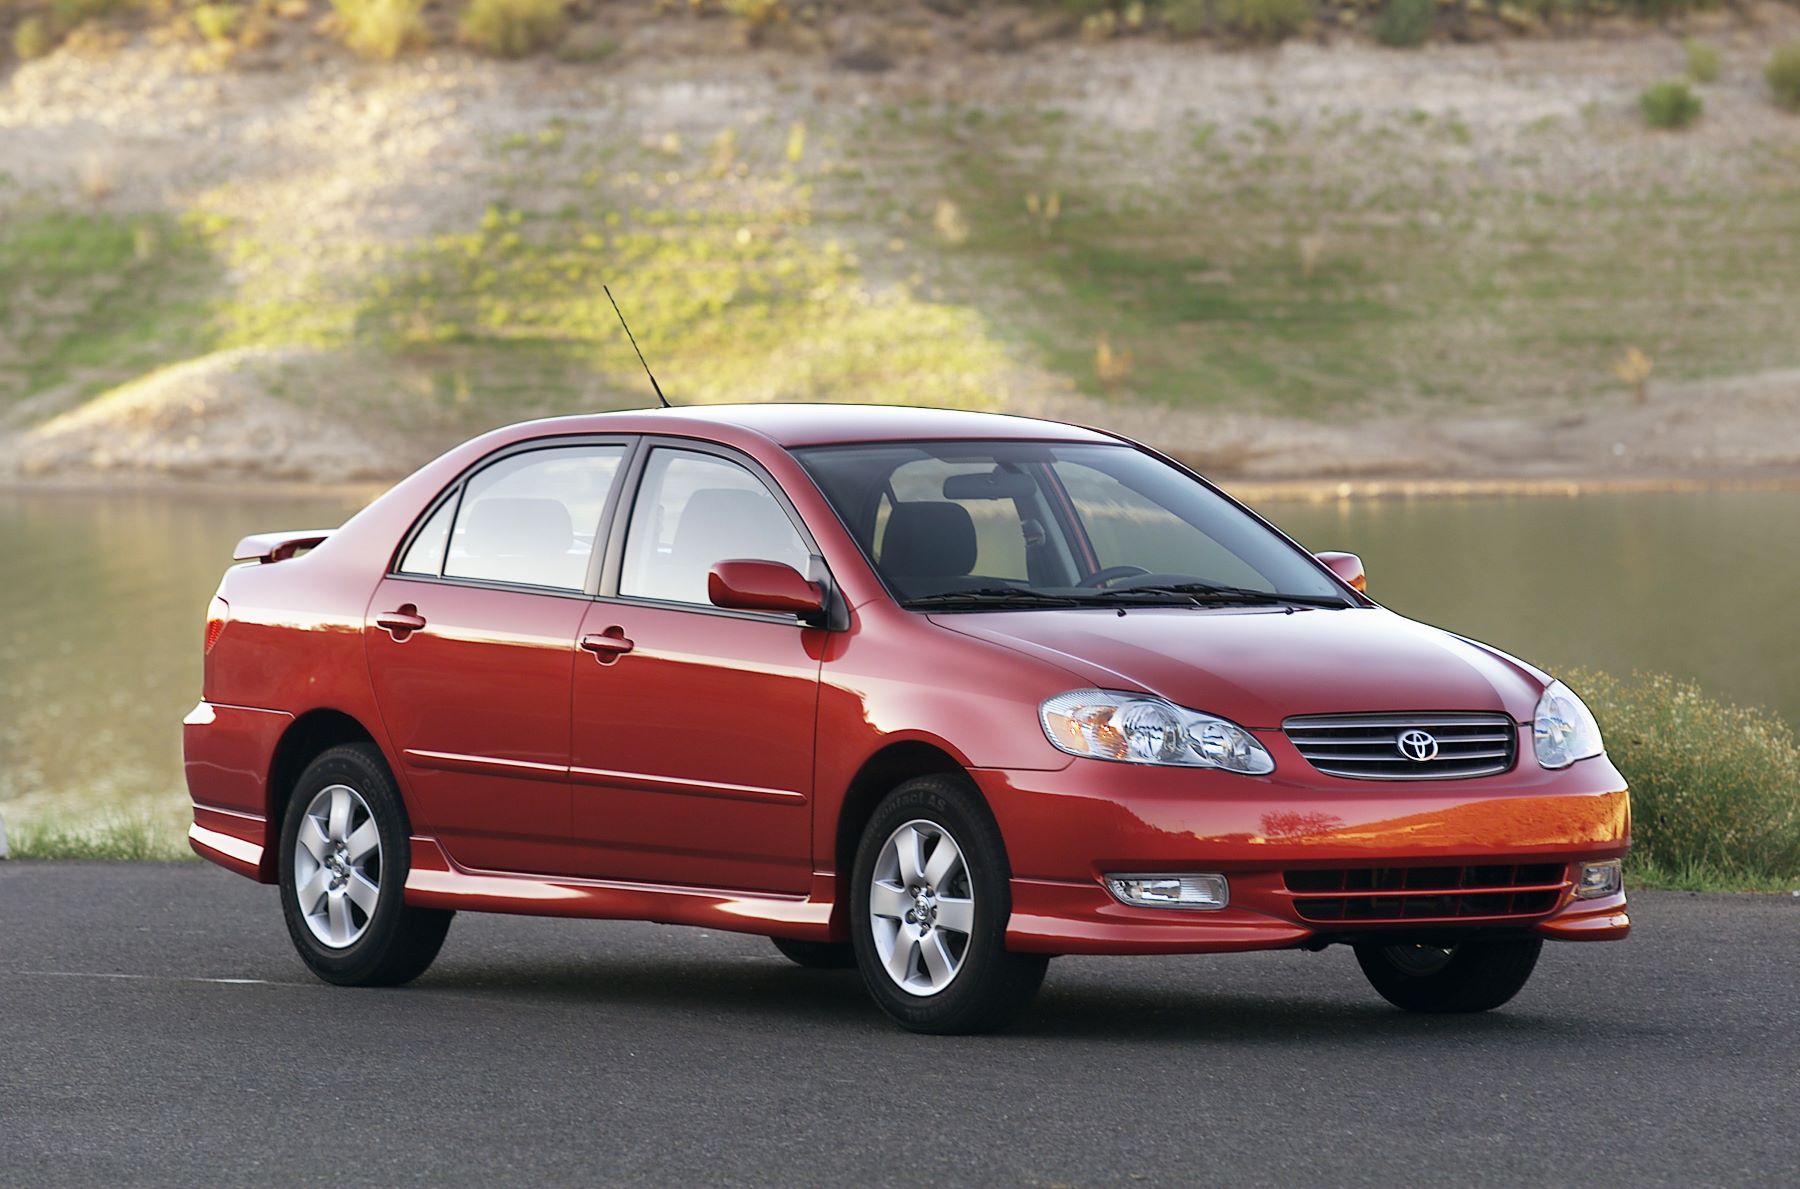 The body style for the 2003, 2004, 2005, and 2006 model years and generation of the Toyota Corolla compact sedan